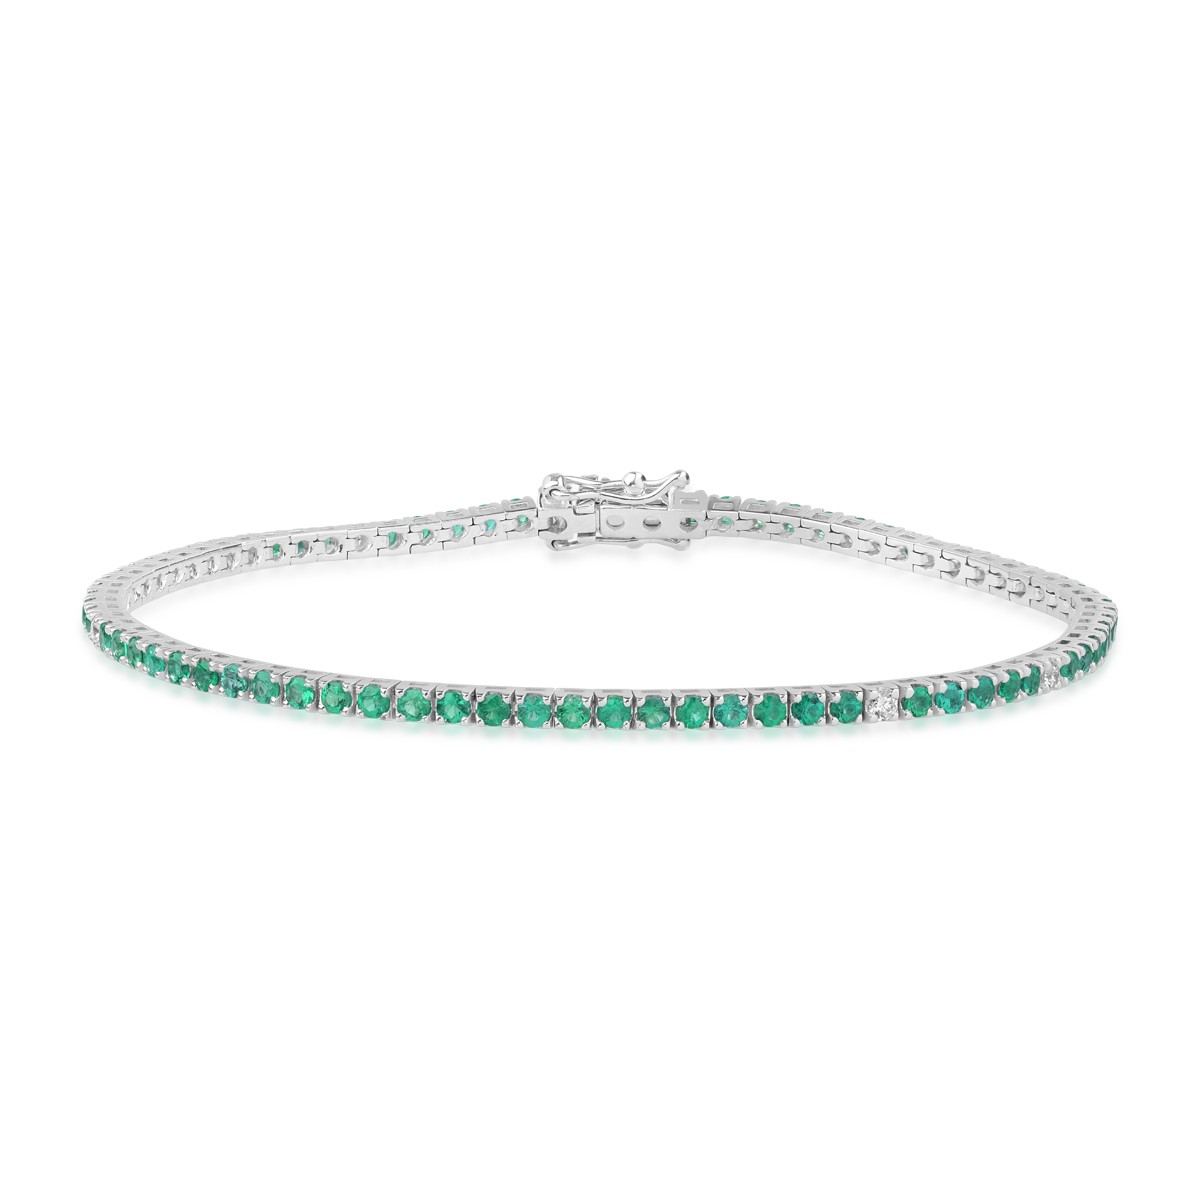 18K white gold bracelet with 0.1ct diamonds and 1.25ct emeralds